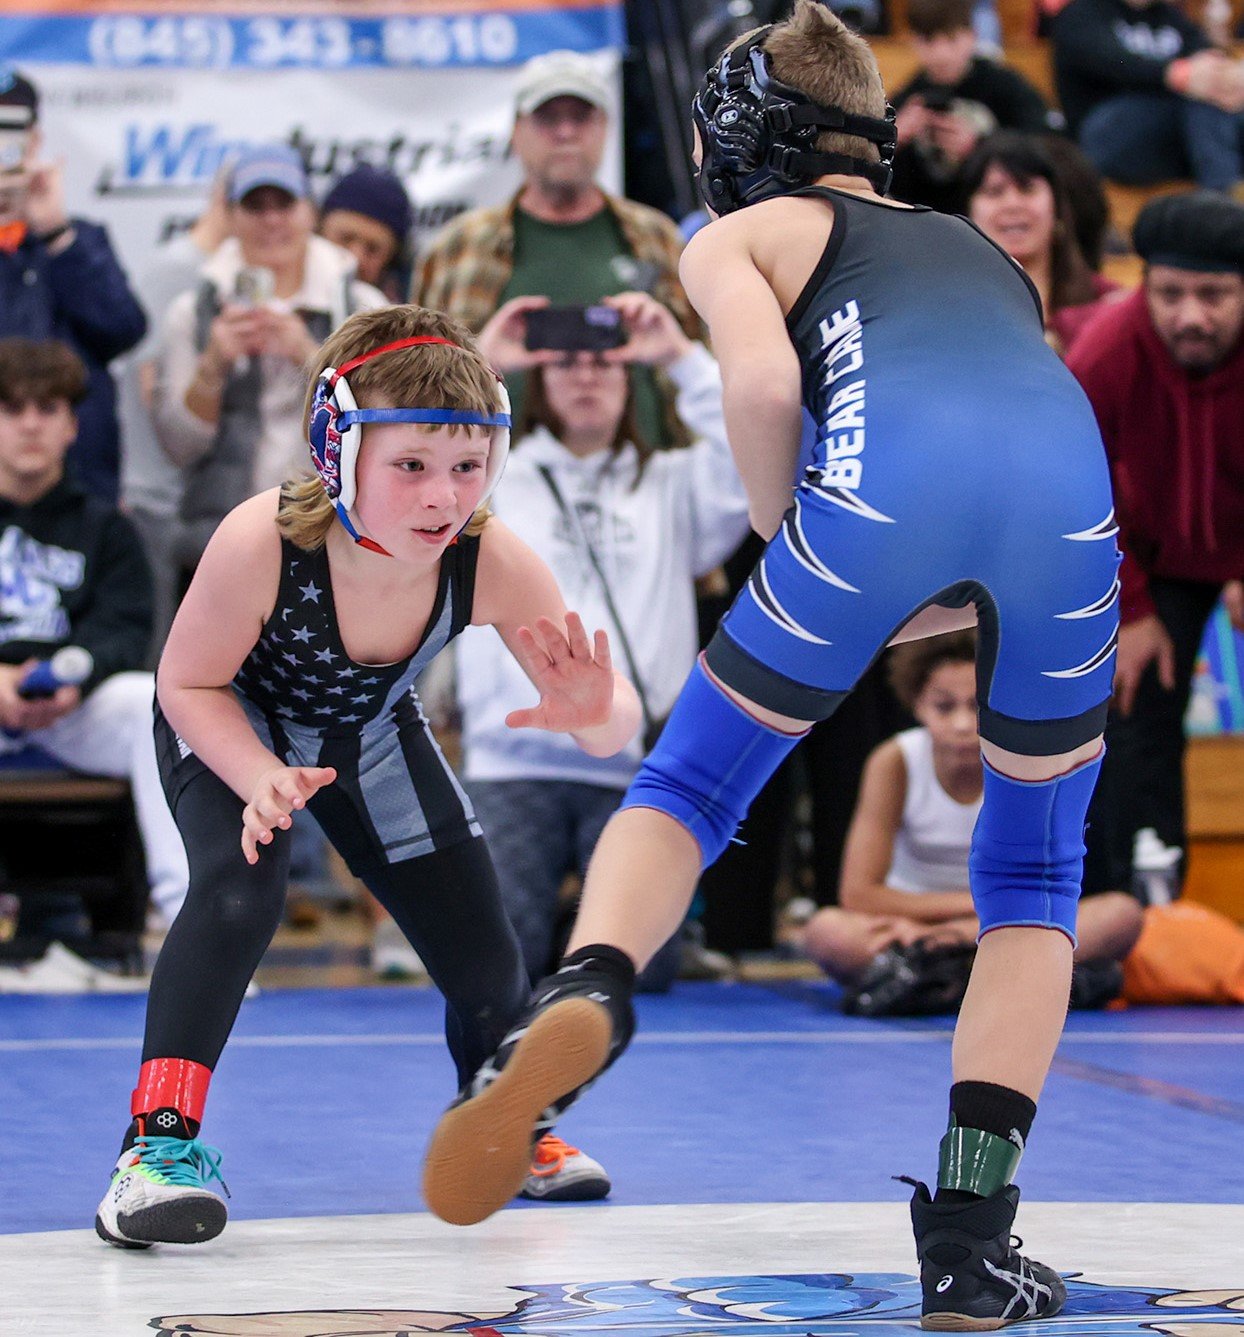 Mason Bliss wrestles during the Hudson Valley’s Premiere Youth Wrestling Tournament on March 4 at Valley Central High School.